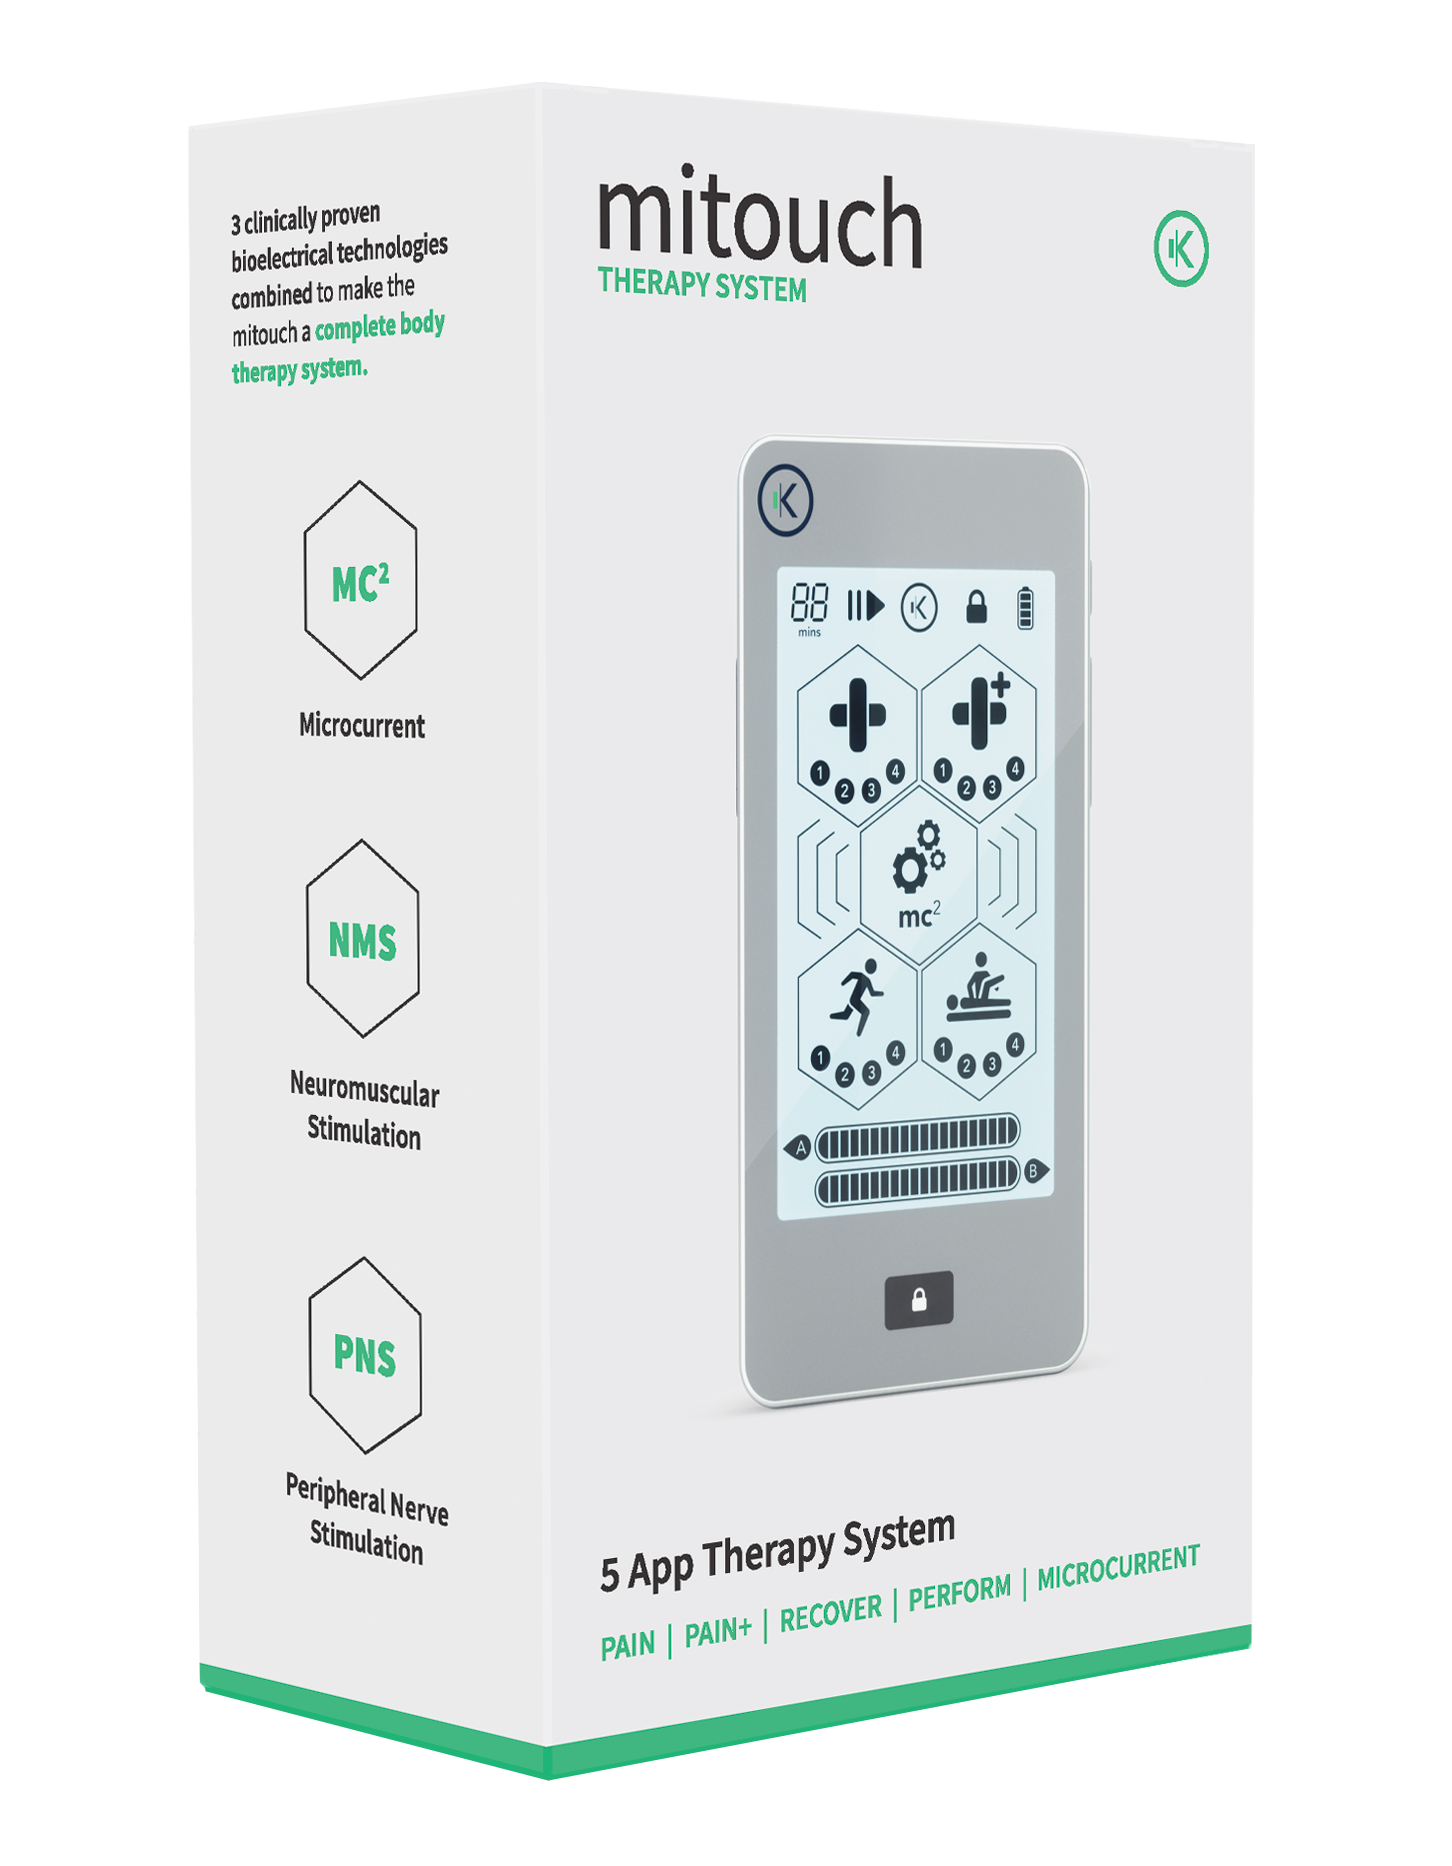 mitouch - Complete Therapy System